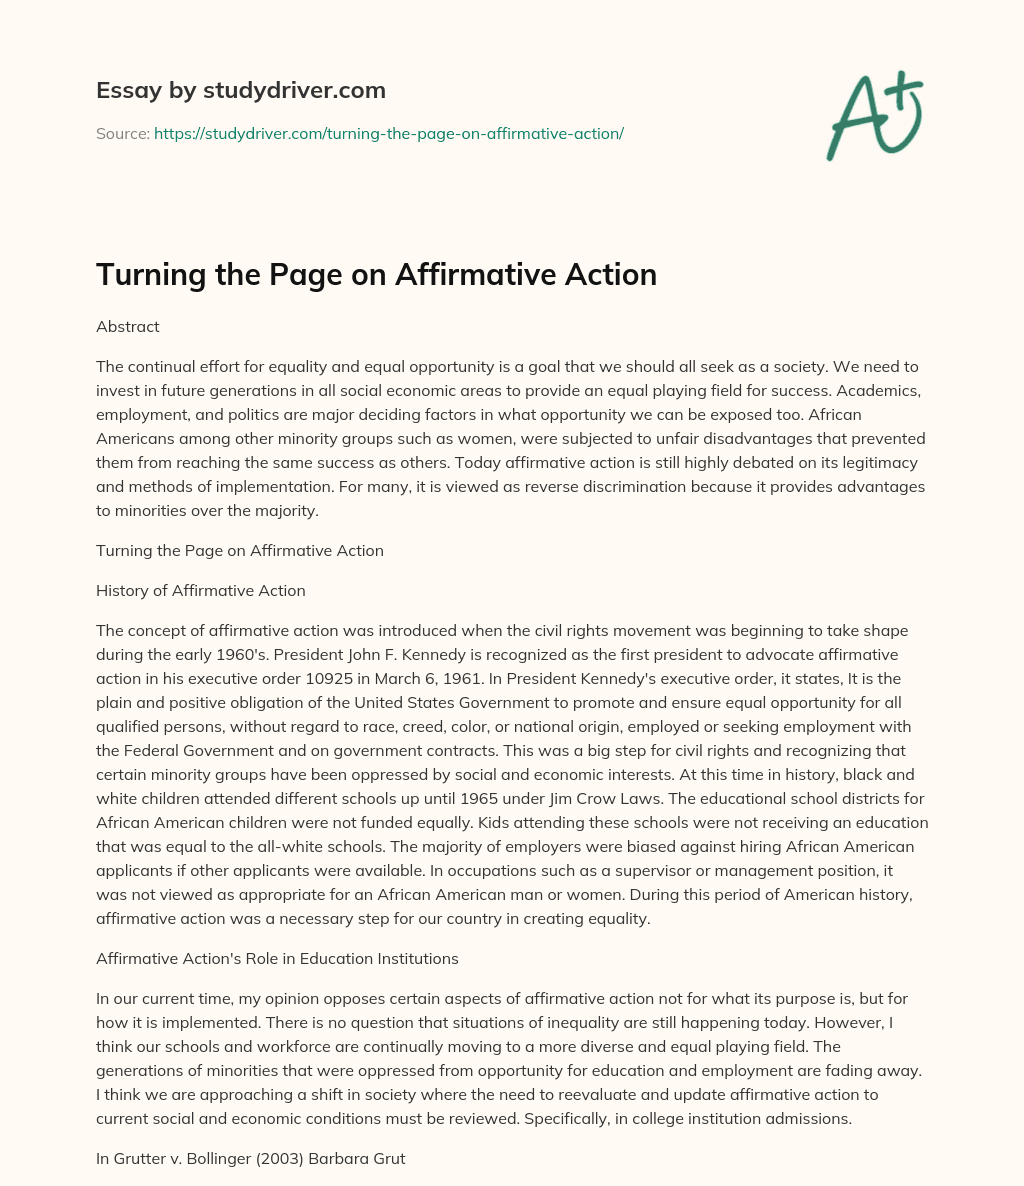 Turning the Page on Affirmative Action essay